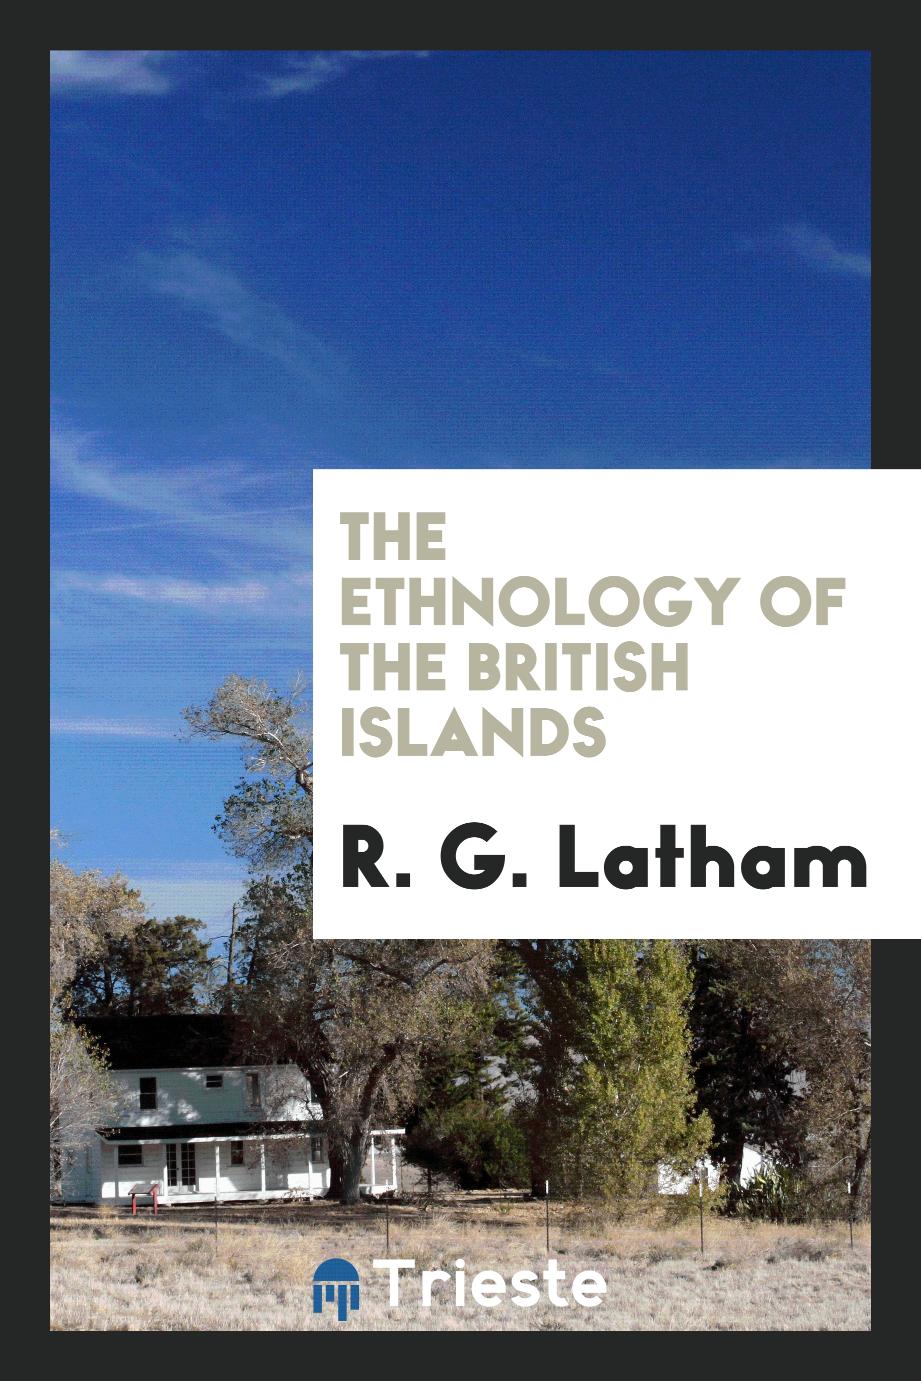 The ethnology of the British islands